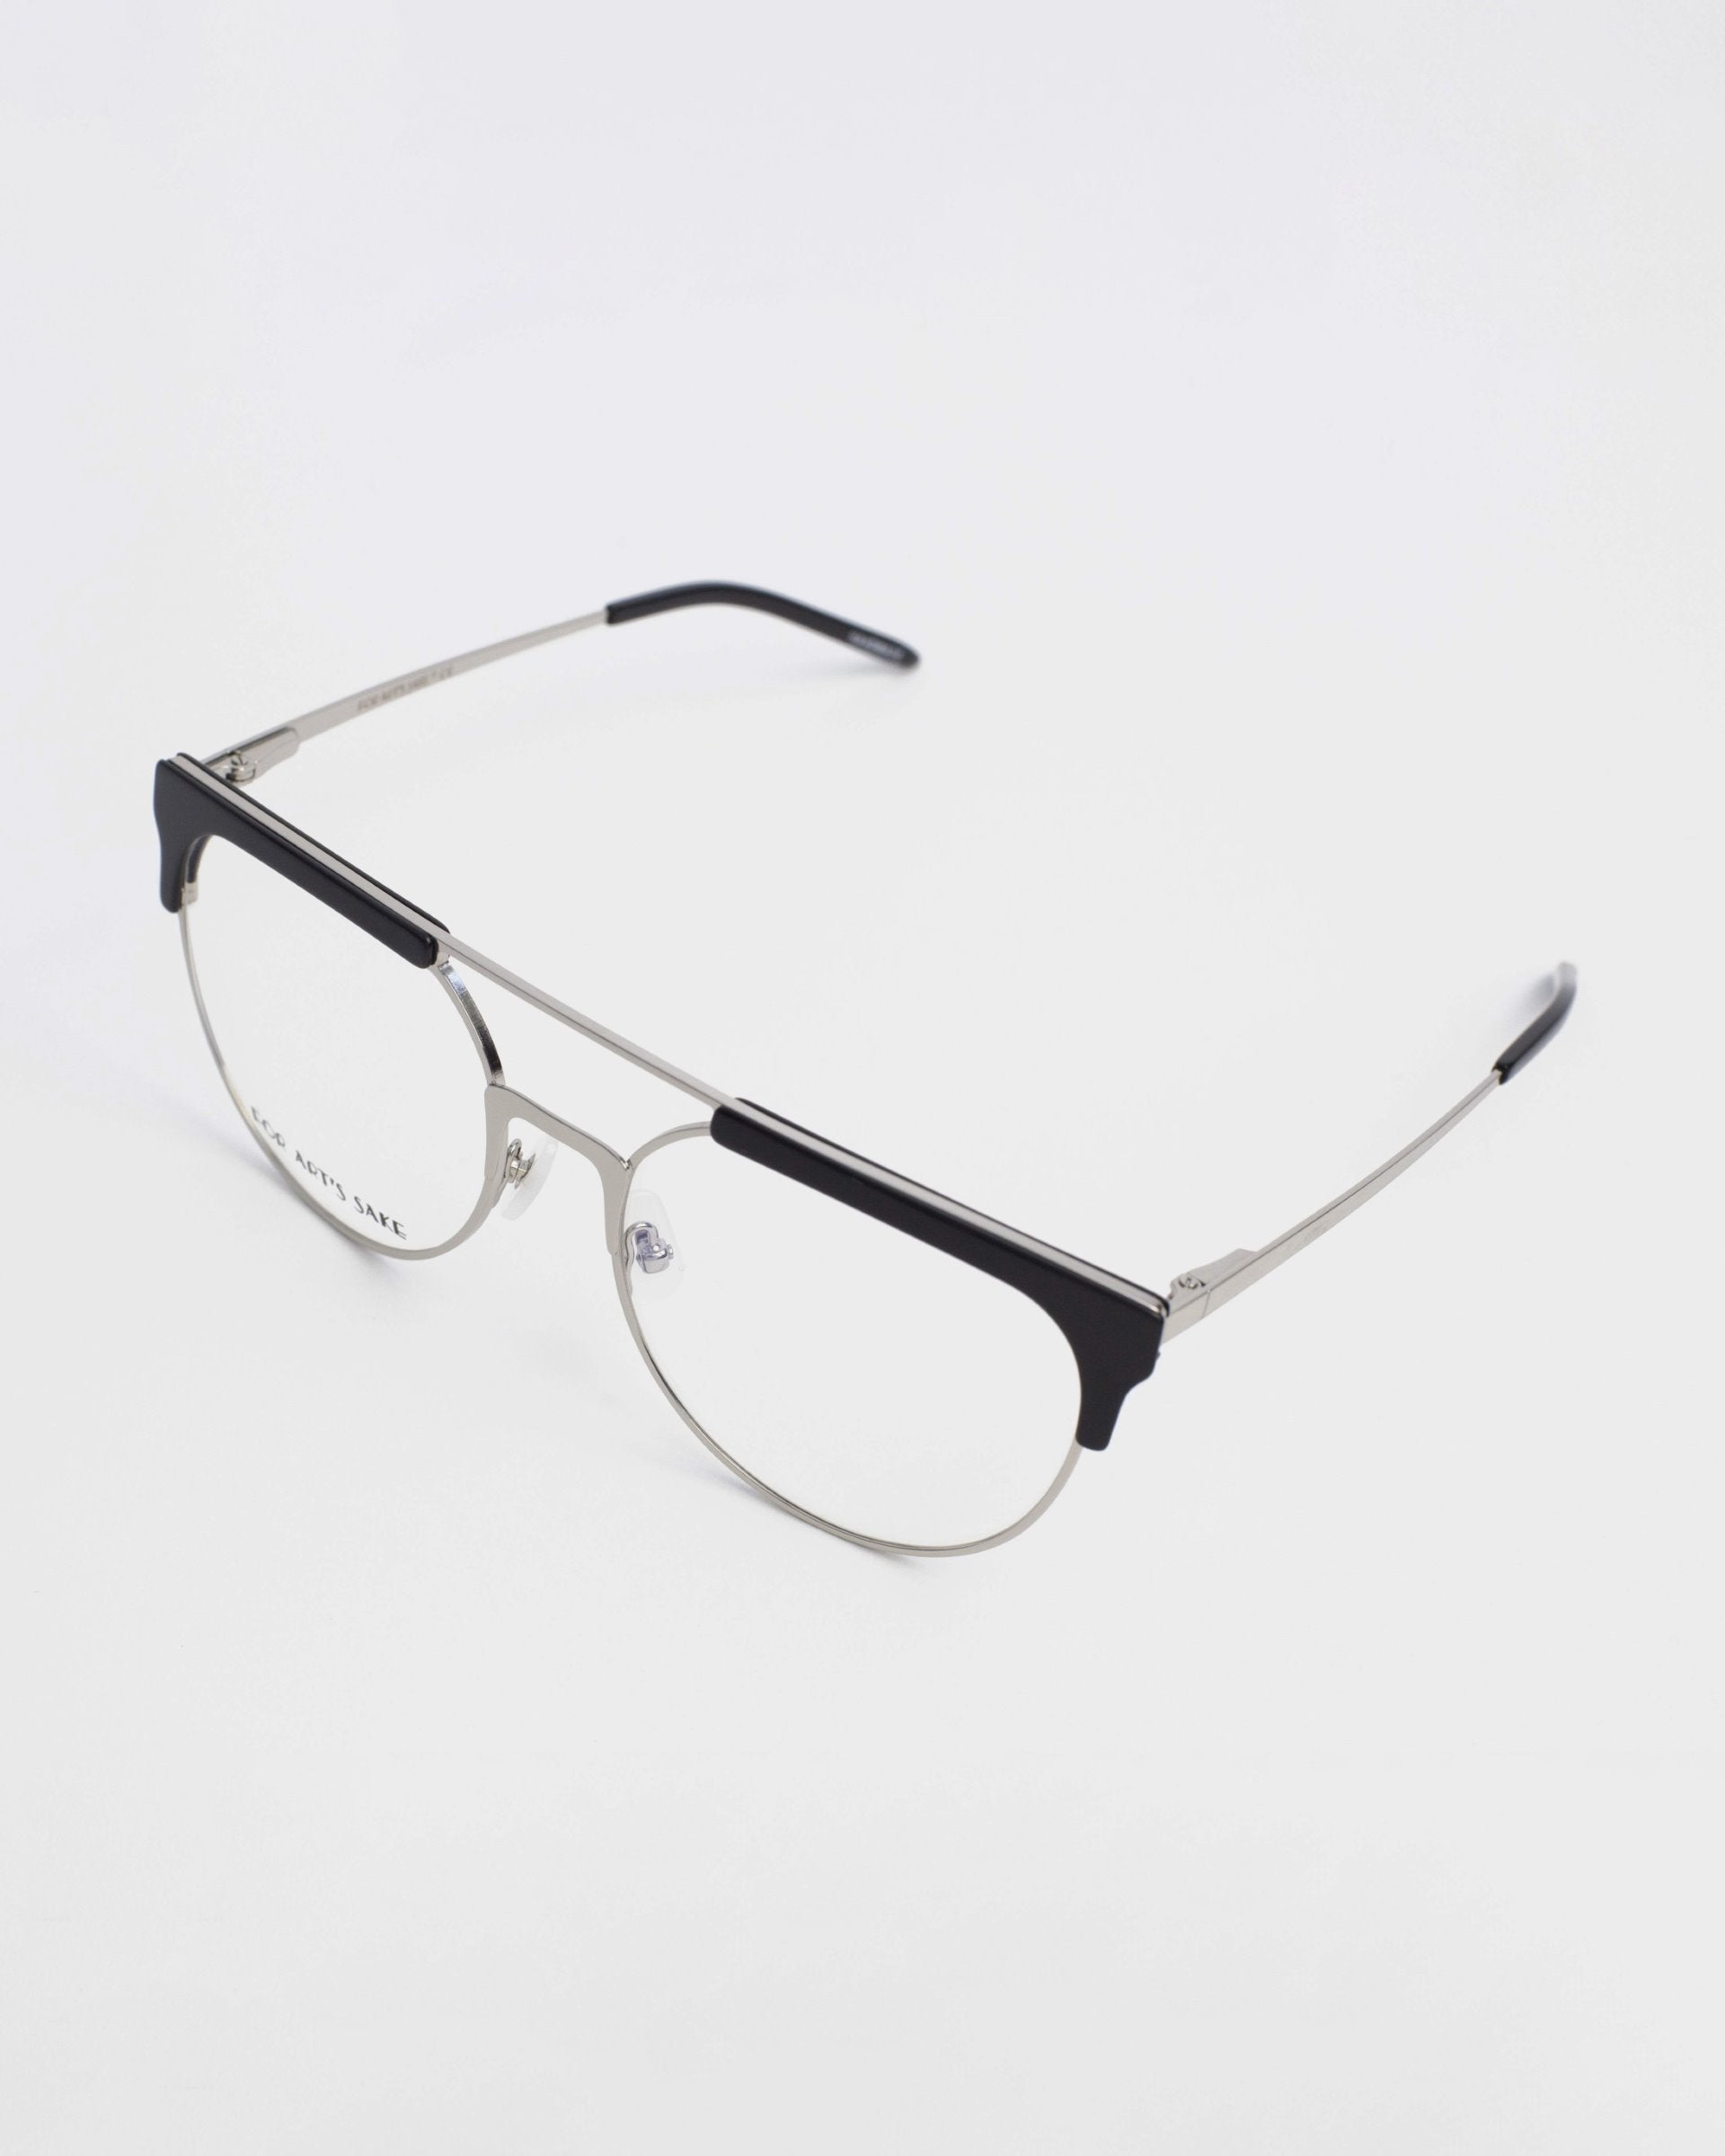 A pair of stylish Frosty prescription glasses by For Art&#39;s Sake® with a metallic frame and black accents on the top of the lenses, resting on a white surface. The design is minimalist with thin arms and clear lenses that include blue light filter technology.